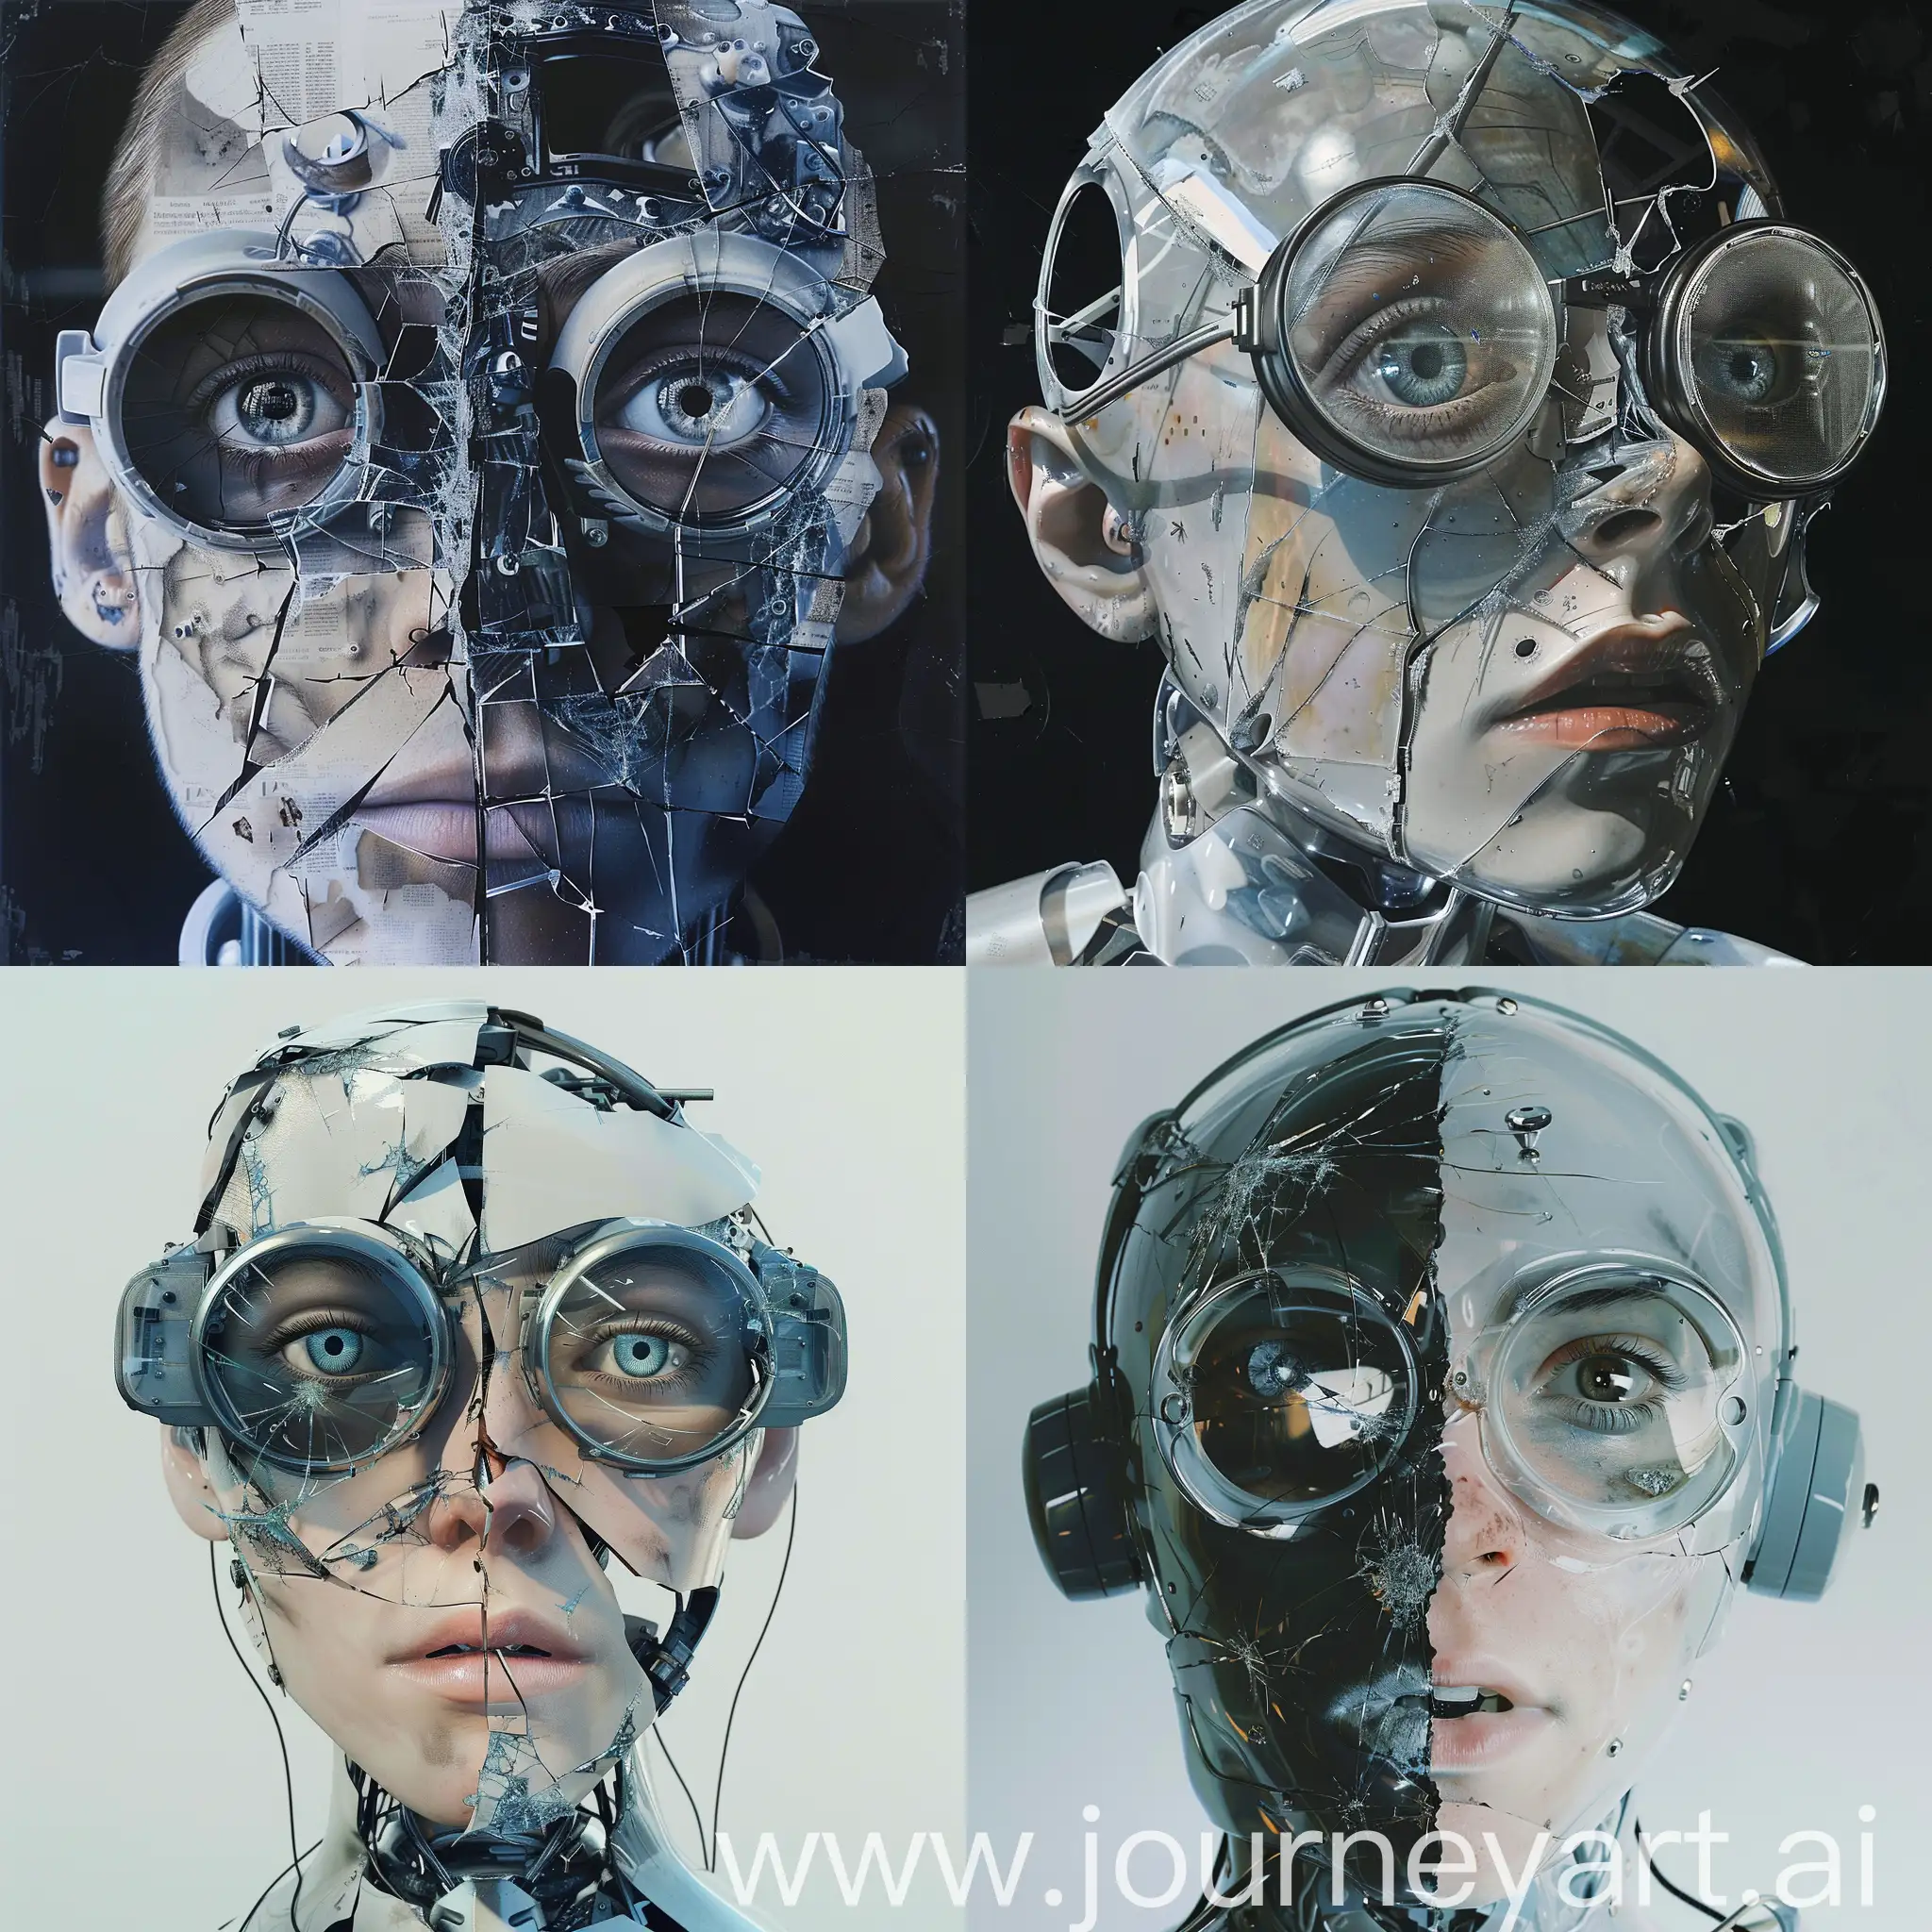 Detailed-Hyperrealistic-Collage-Portrait-of-a-Broken-Robot-with-Glass-Details